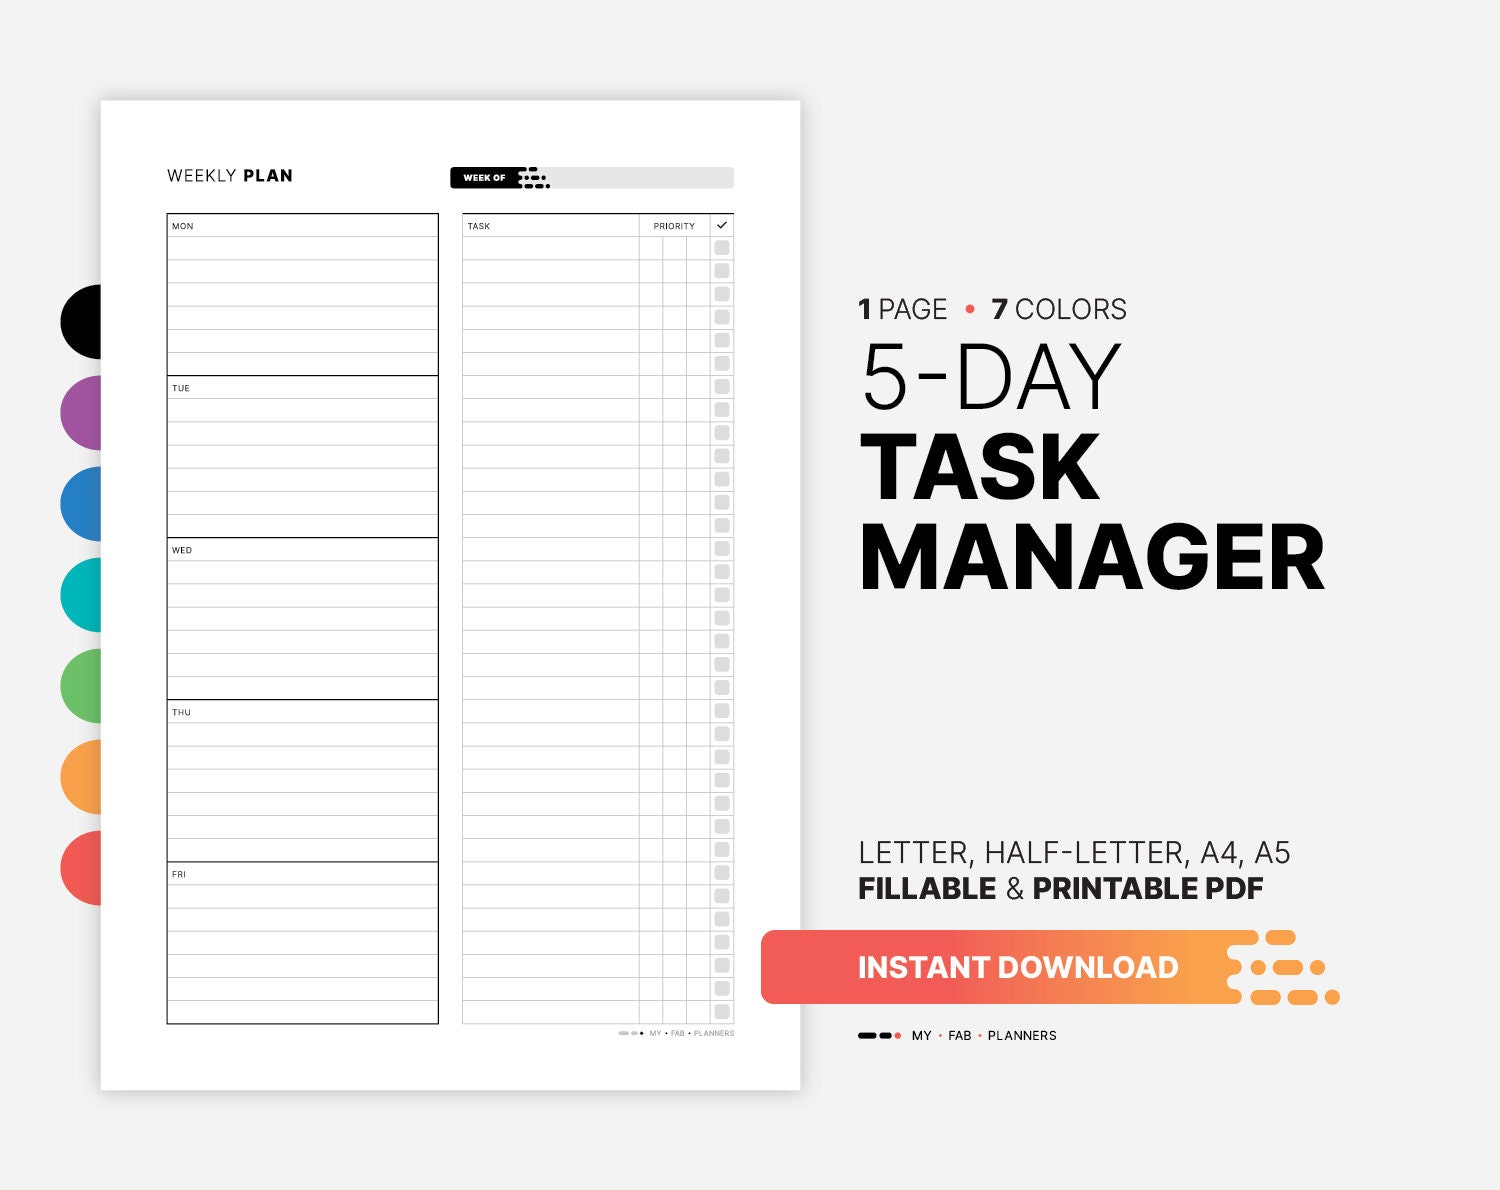 MN095 - Daily Task Manager - DO1P - PDF